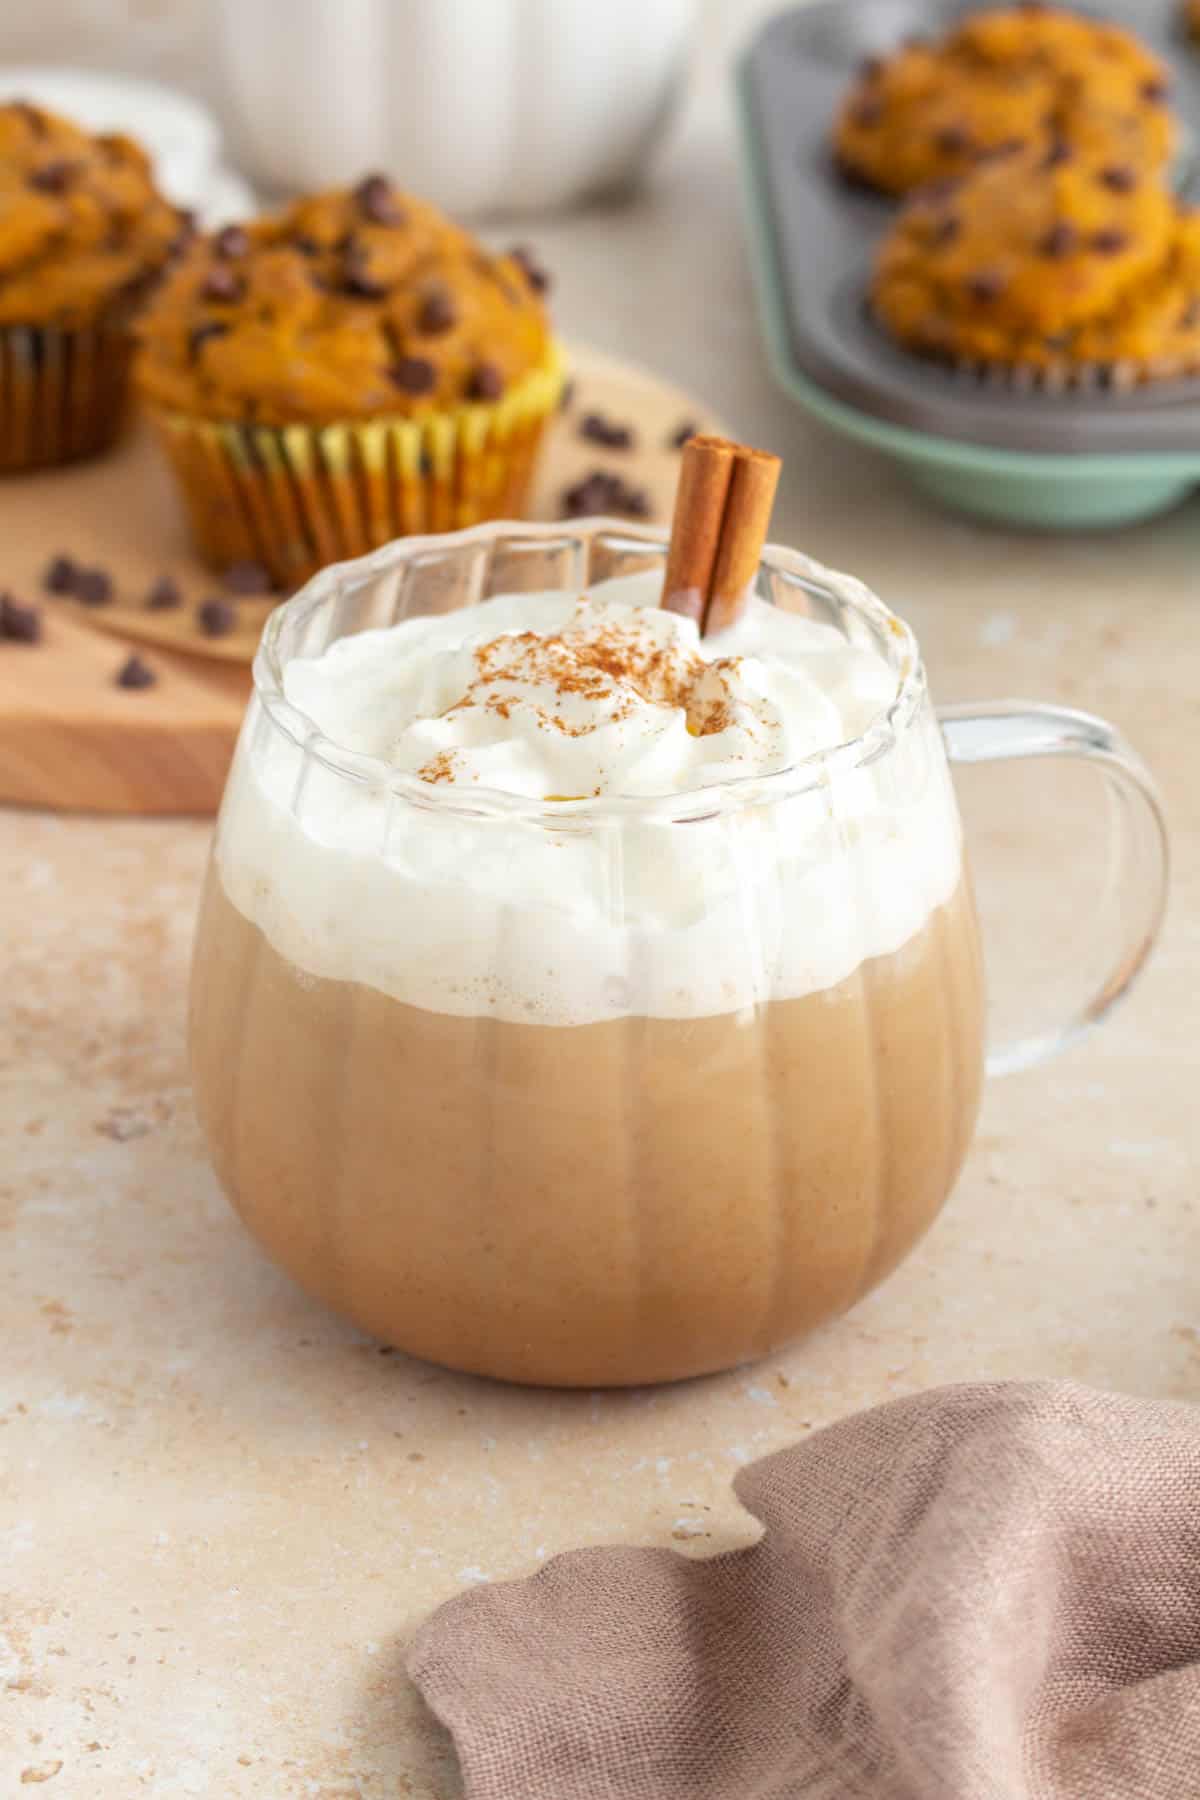 A mug of pumpkin spice latte with whipped cream and a sprinkle of pumpkin pie spice on top. A cinnamon stick inserted. Muffins in the background.